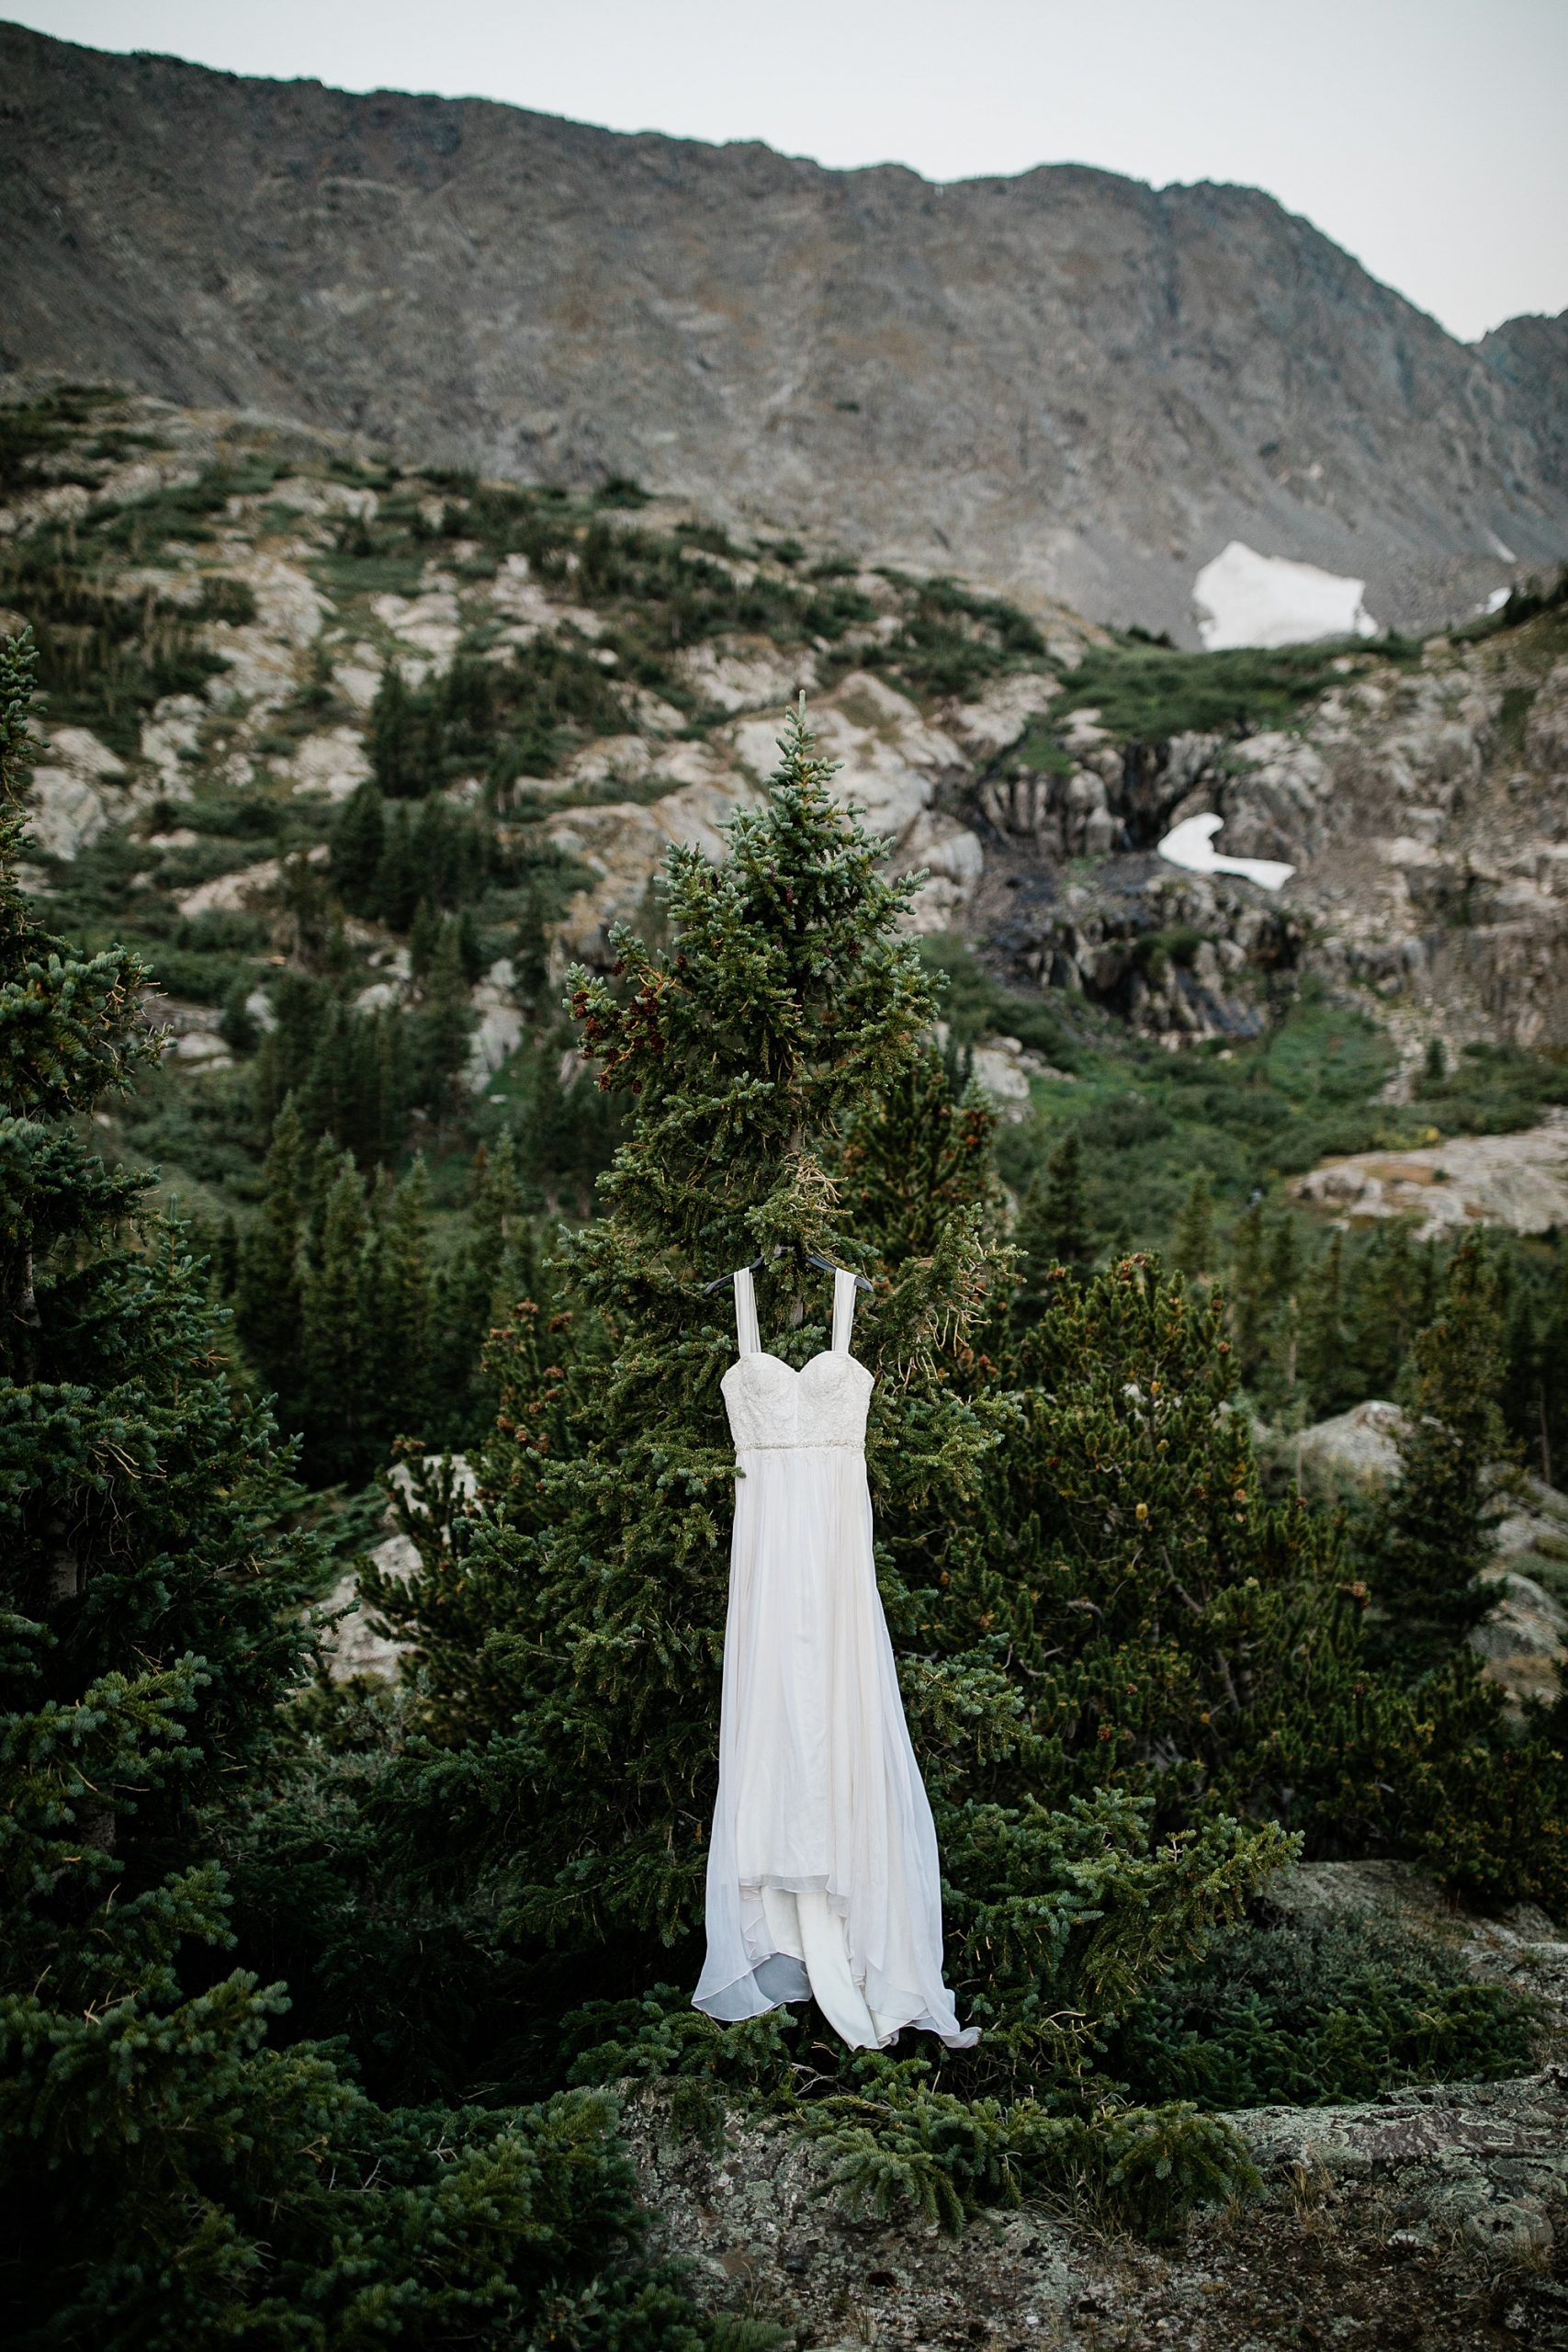 dress hanging in the mountains